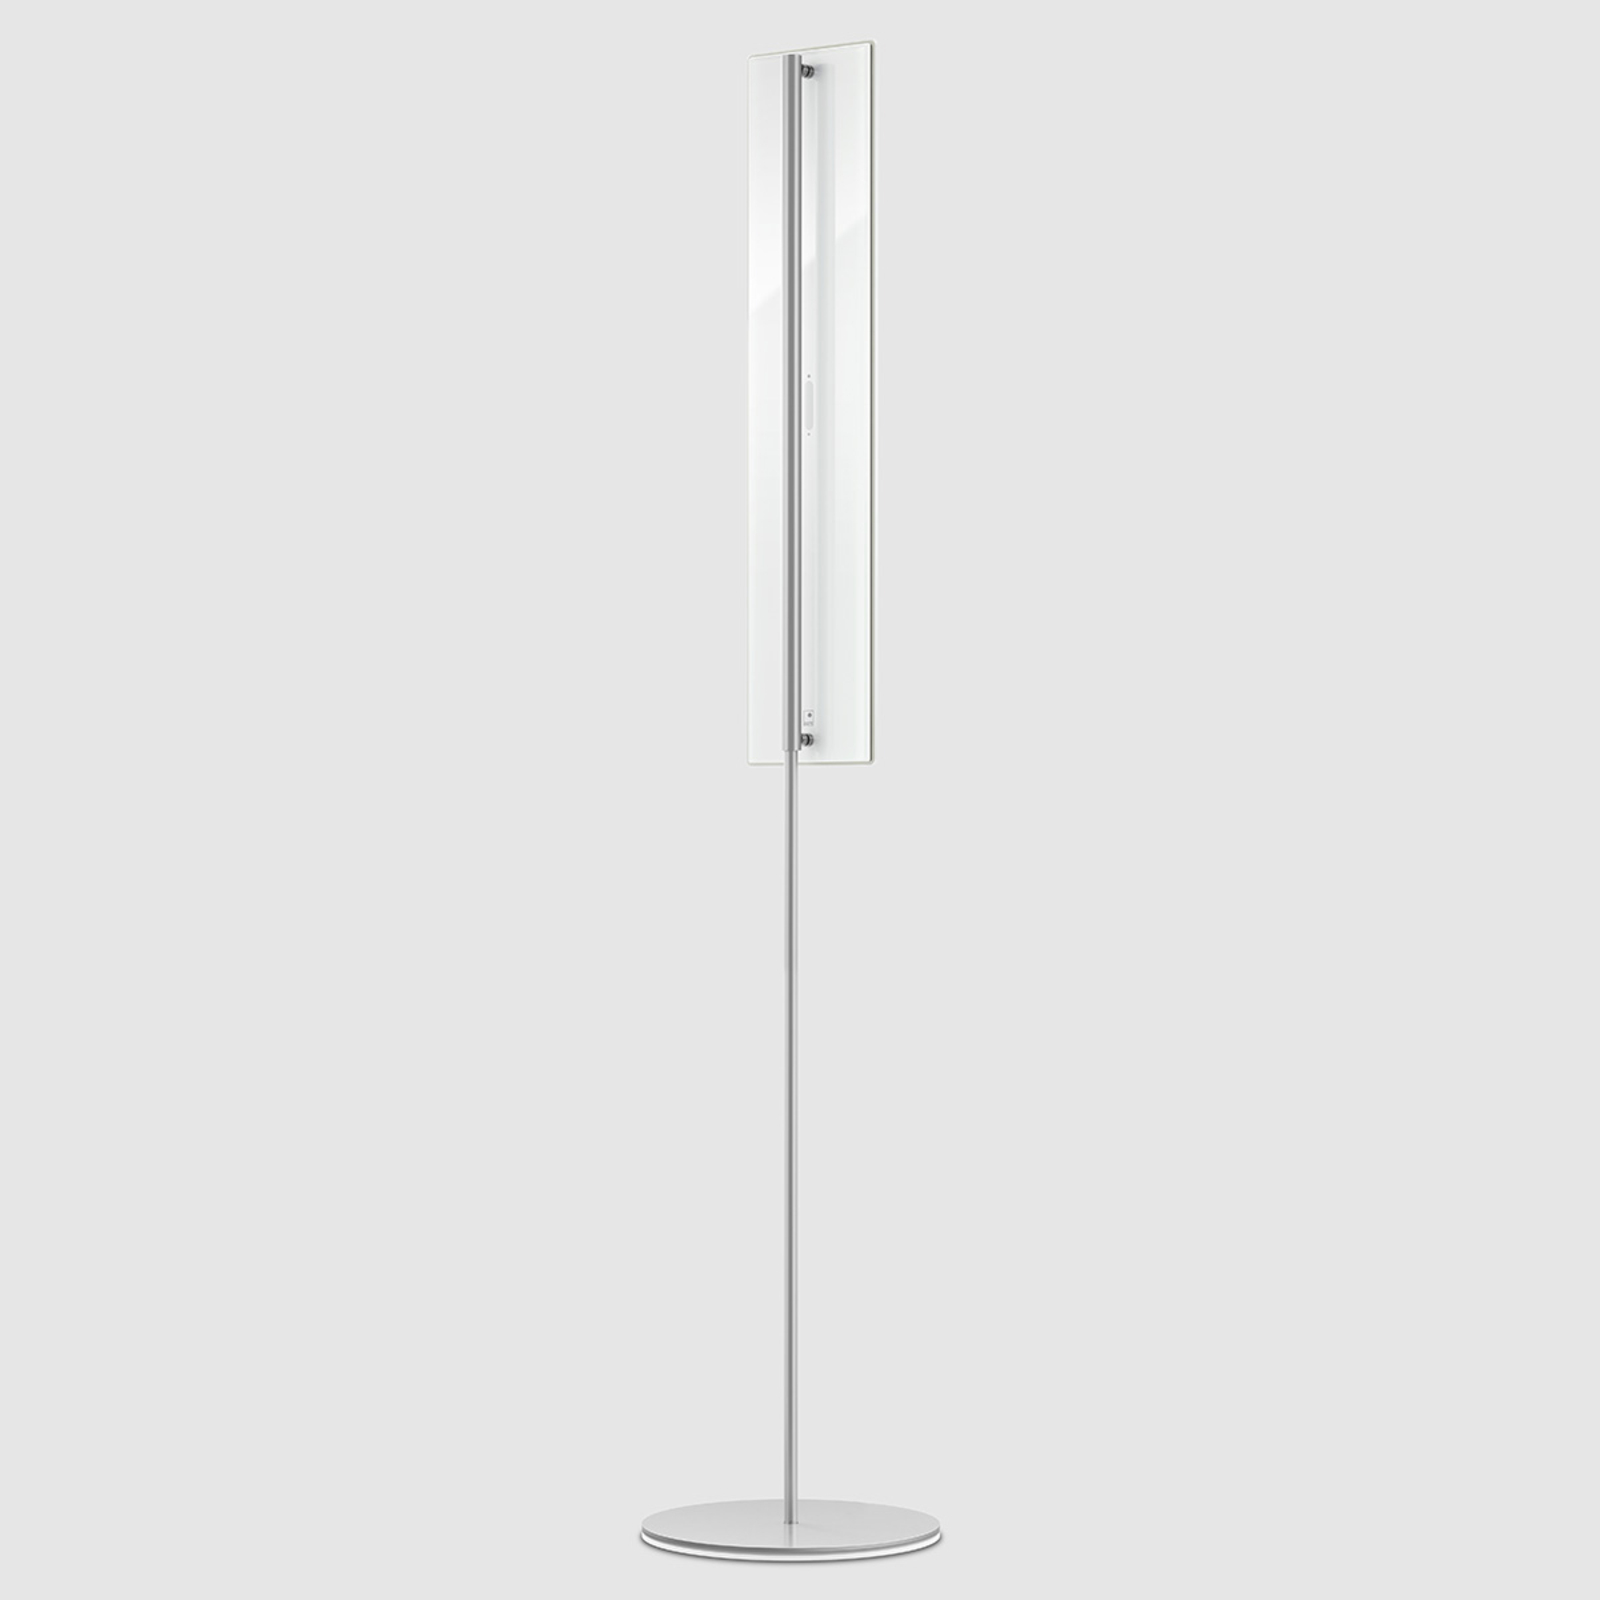 Made in Germany - OMLED One f5 lampadaire blanc